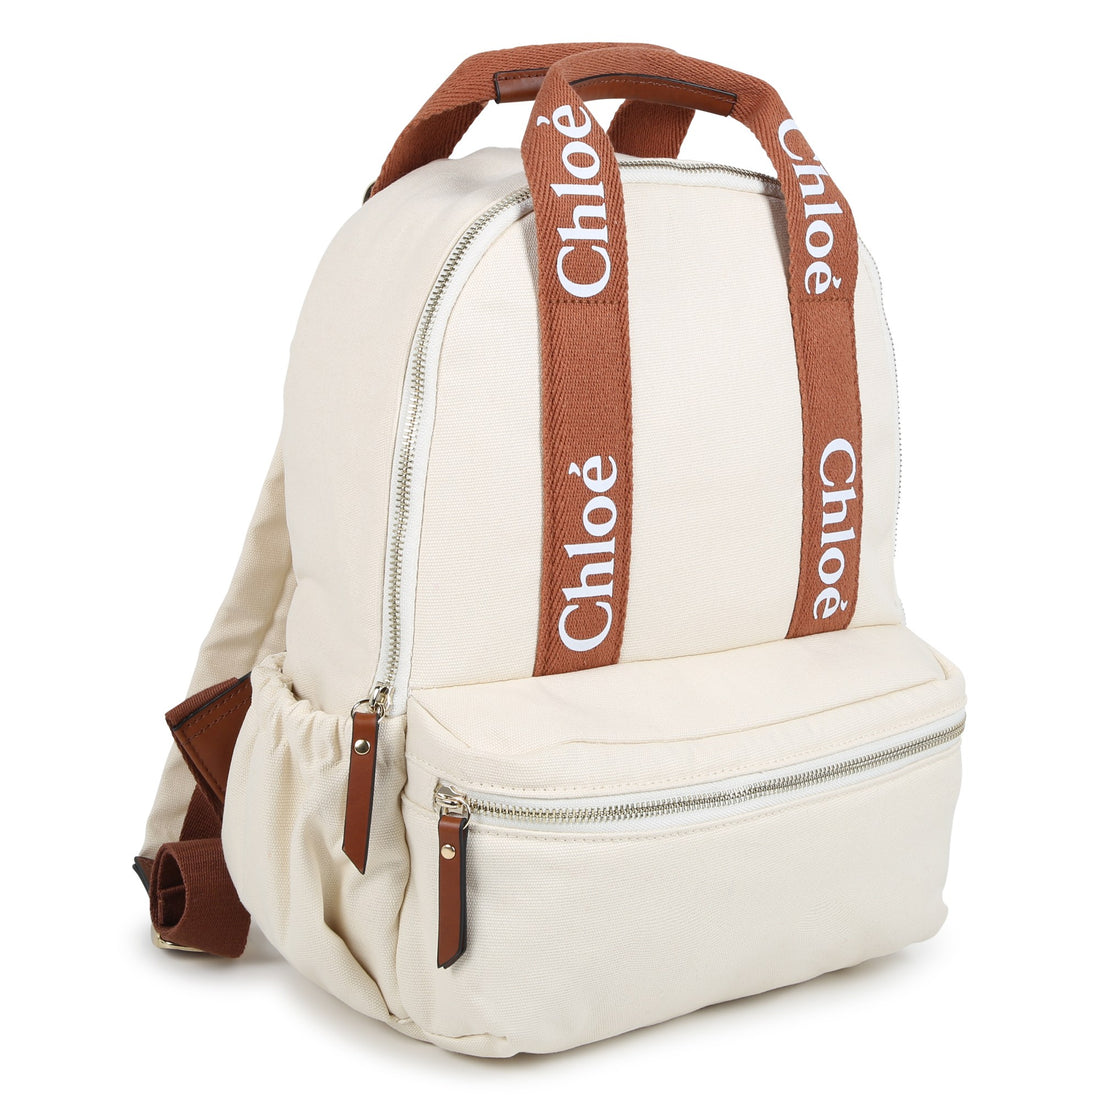 Chloe Changing Bag - Stylish and Practical for Modern Parents | Schools Out